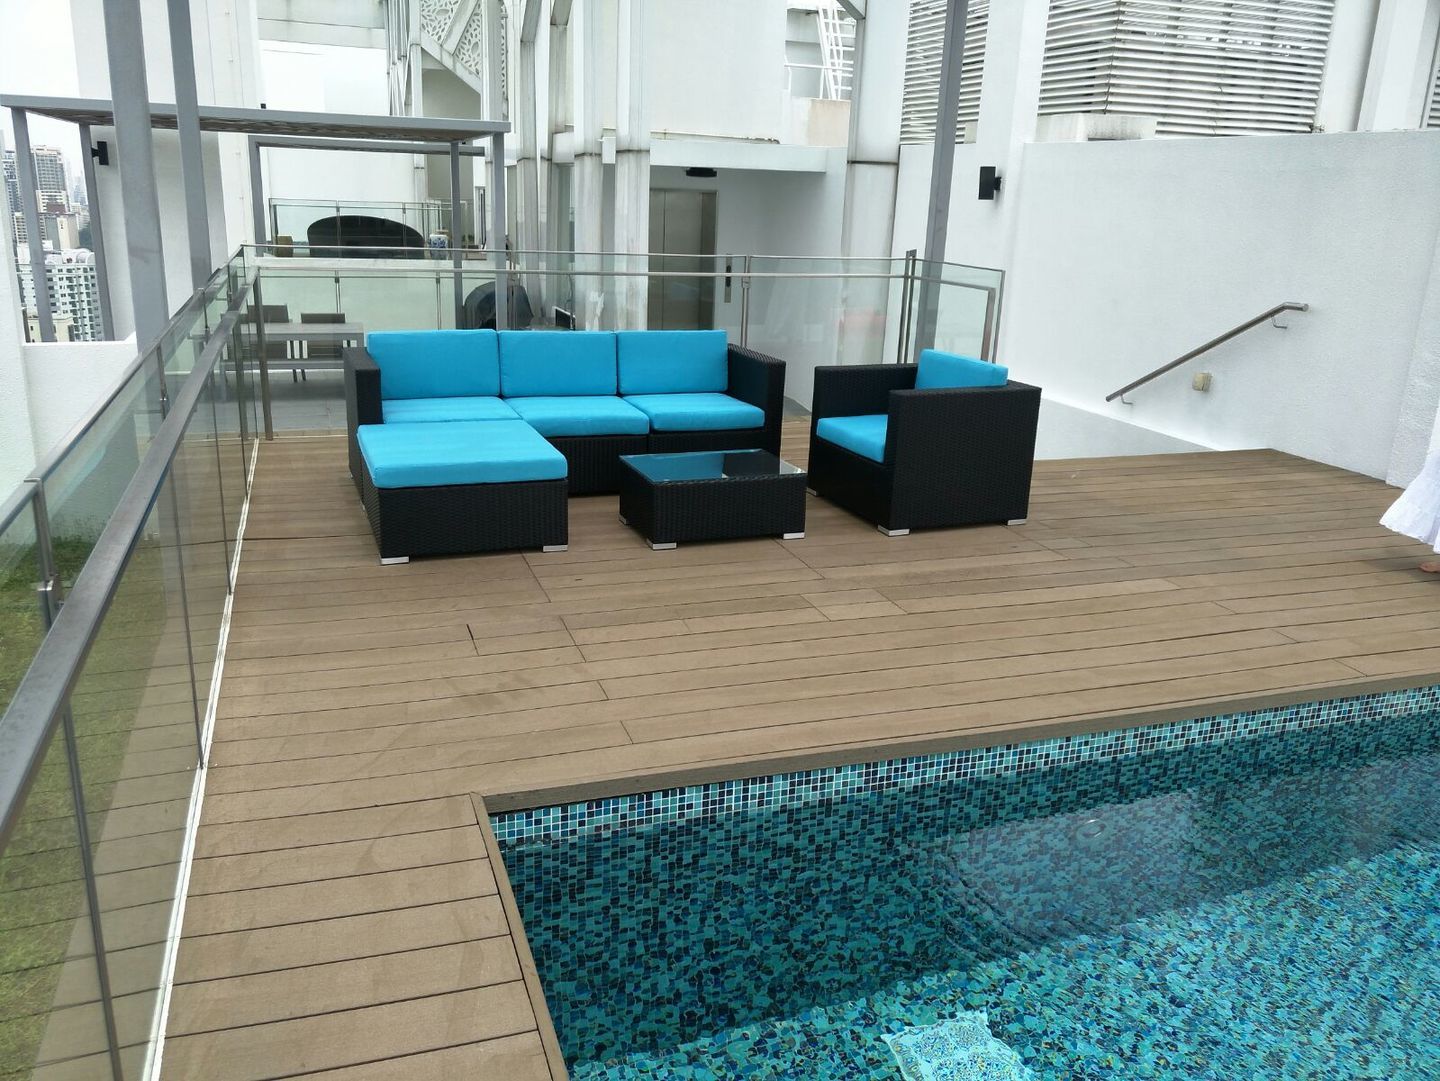 Outdoor Furniture beside a swimming pool in Singapore